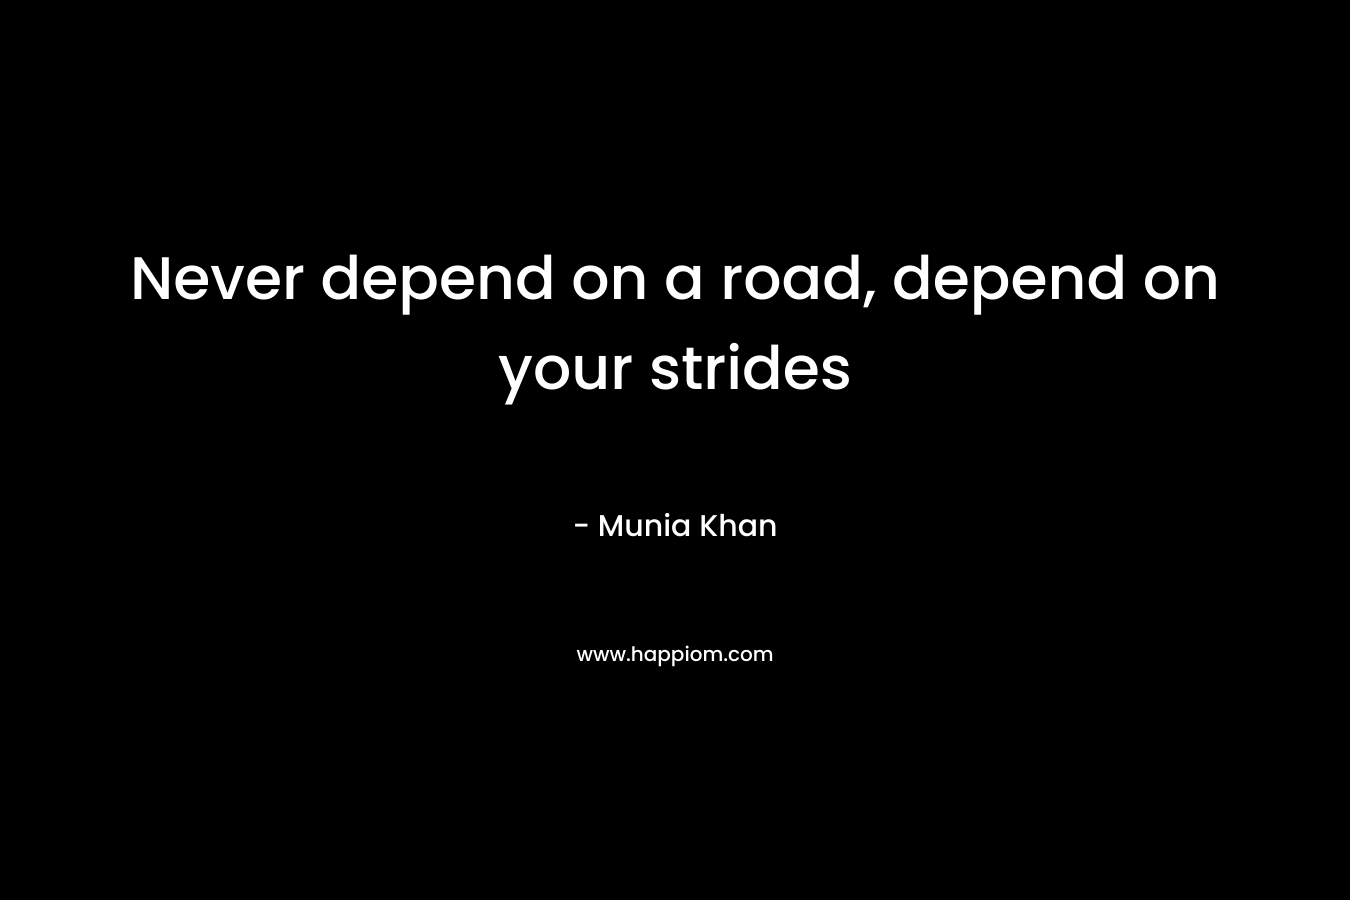 Never depend on a road, depend on your strides